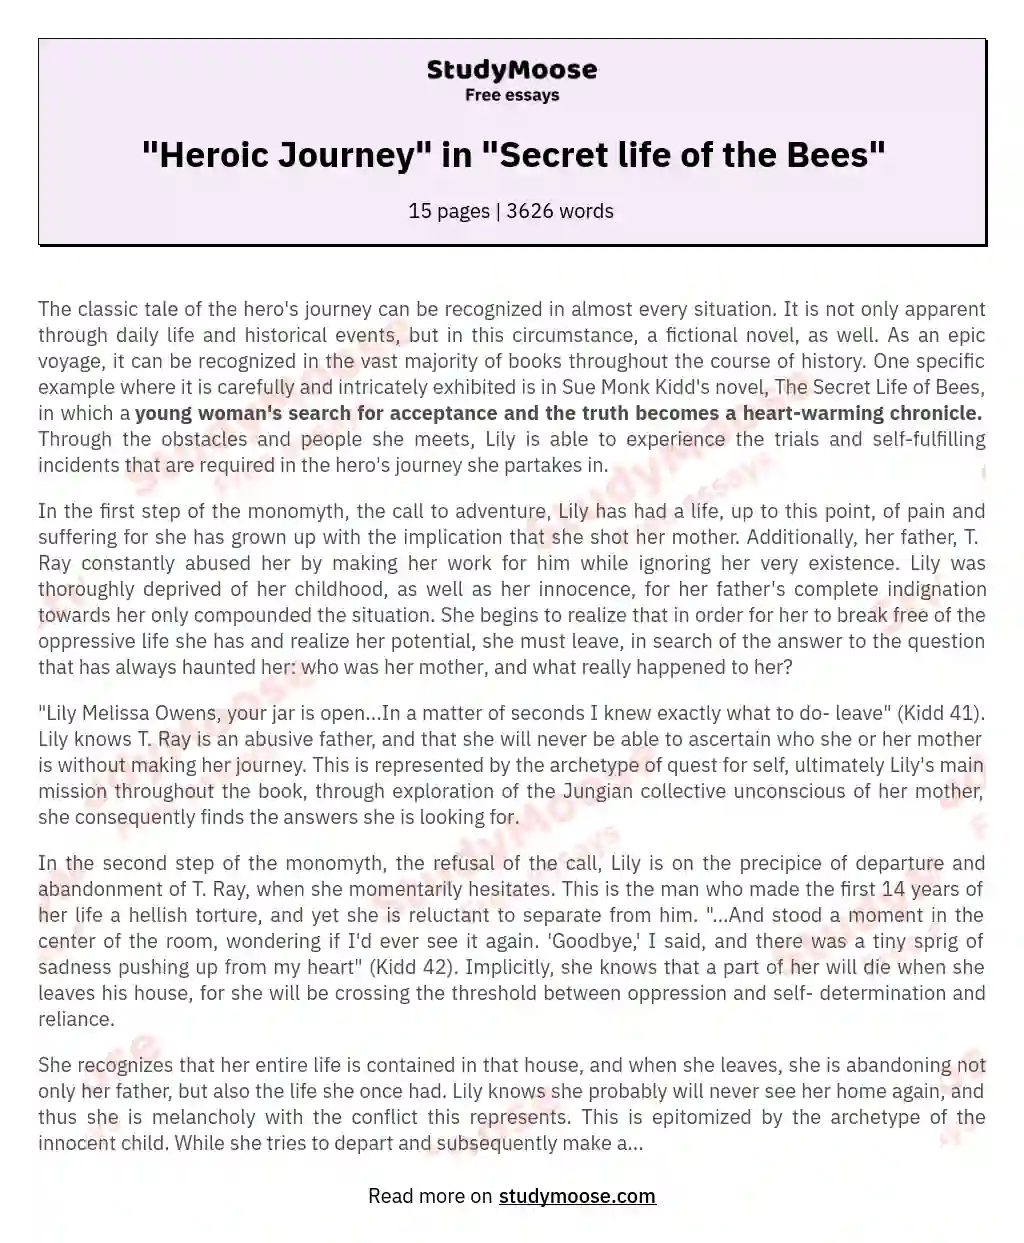 "Heroic Journey" in "Secret life of the Bees"